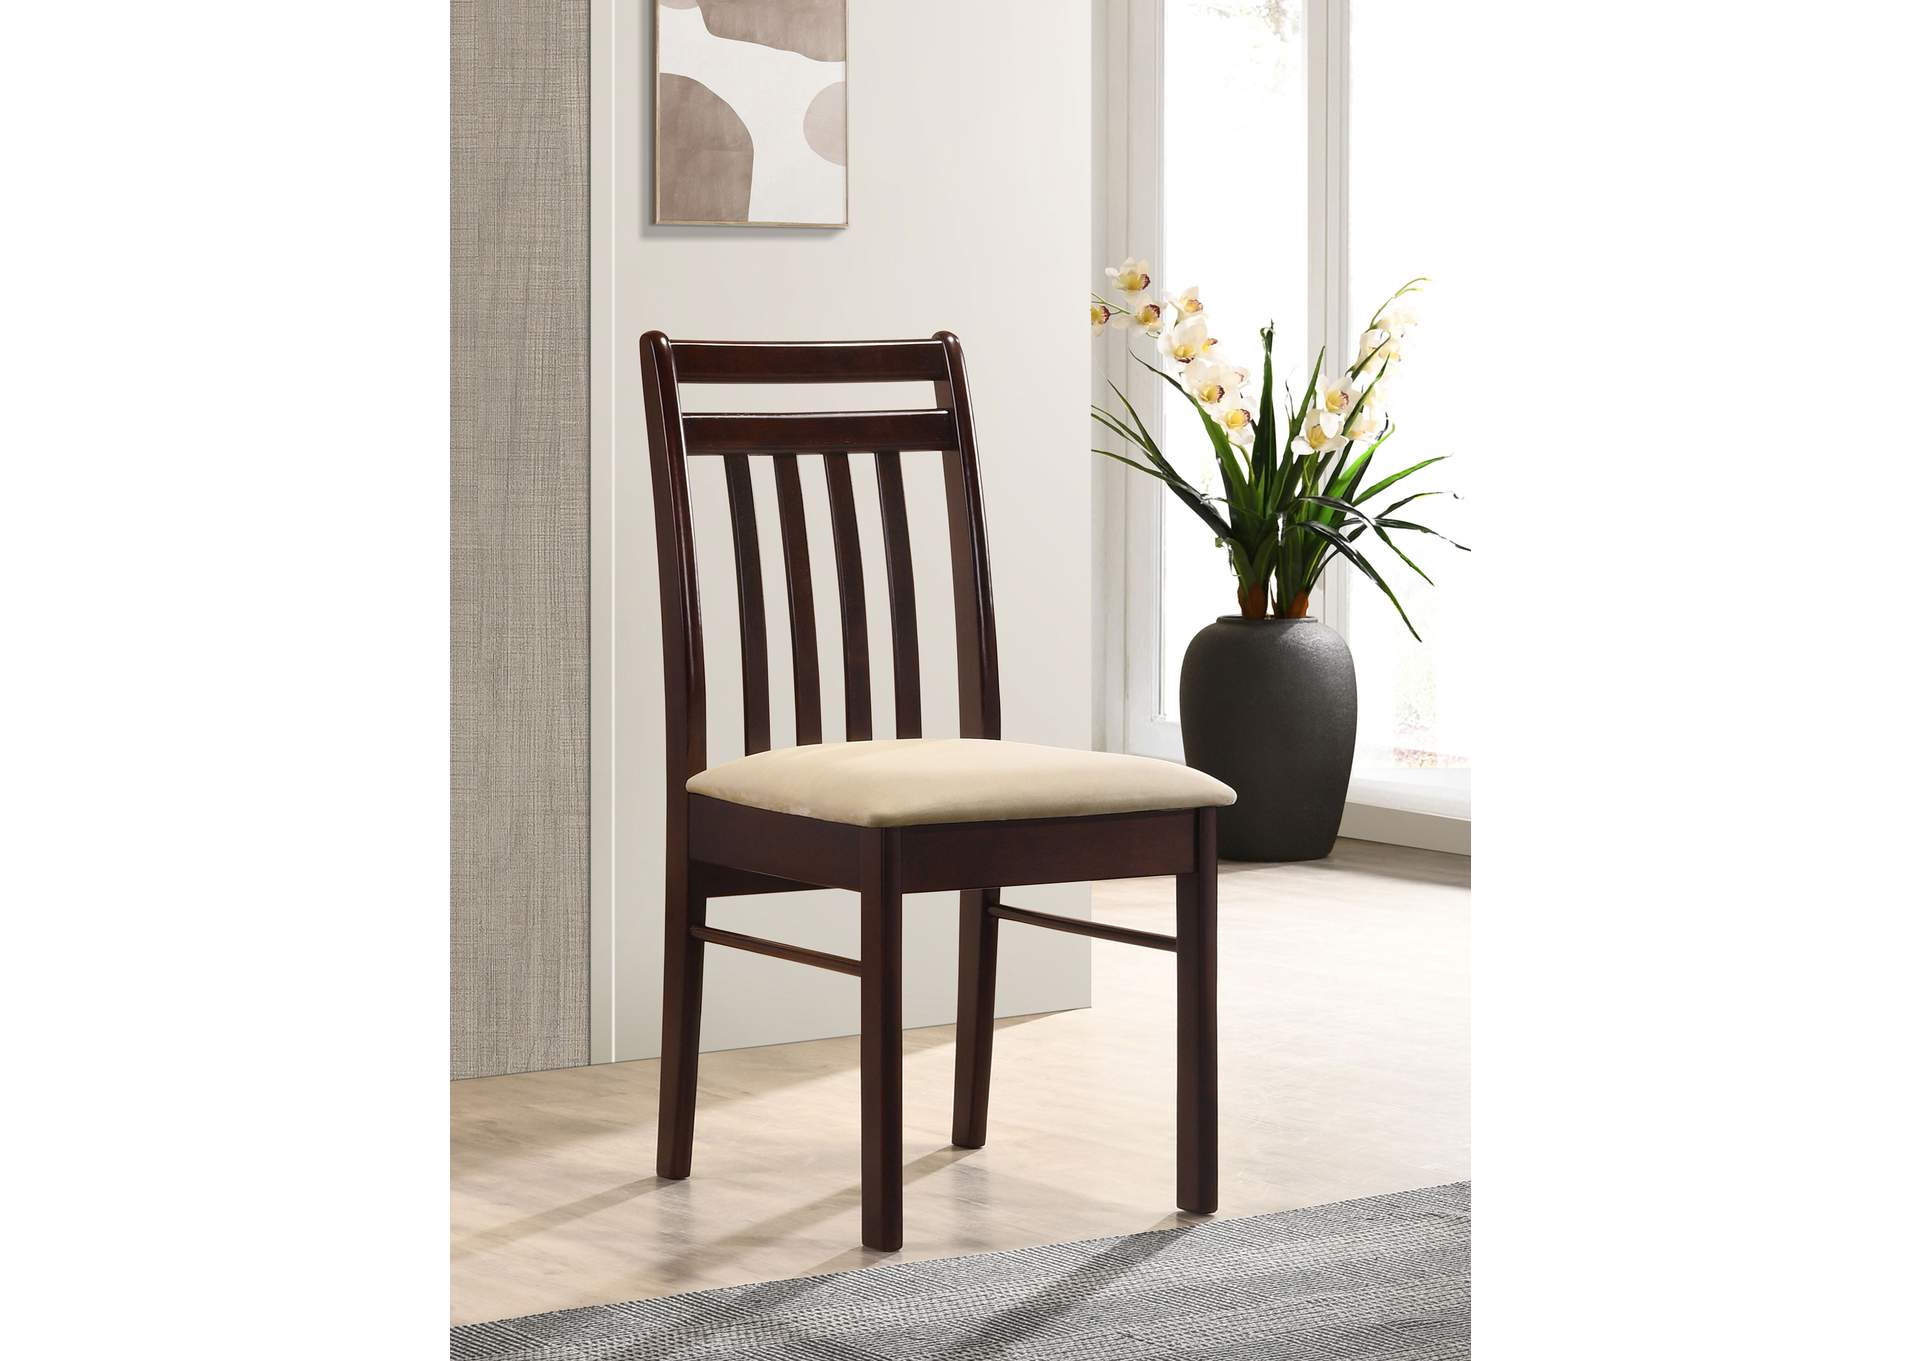 Phoenix Slat Back Chair Light Brown and Cappuccino,Coaster Furniture